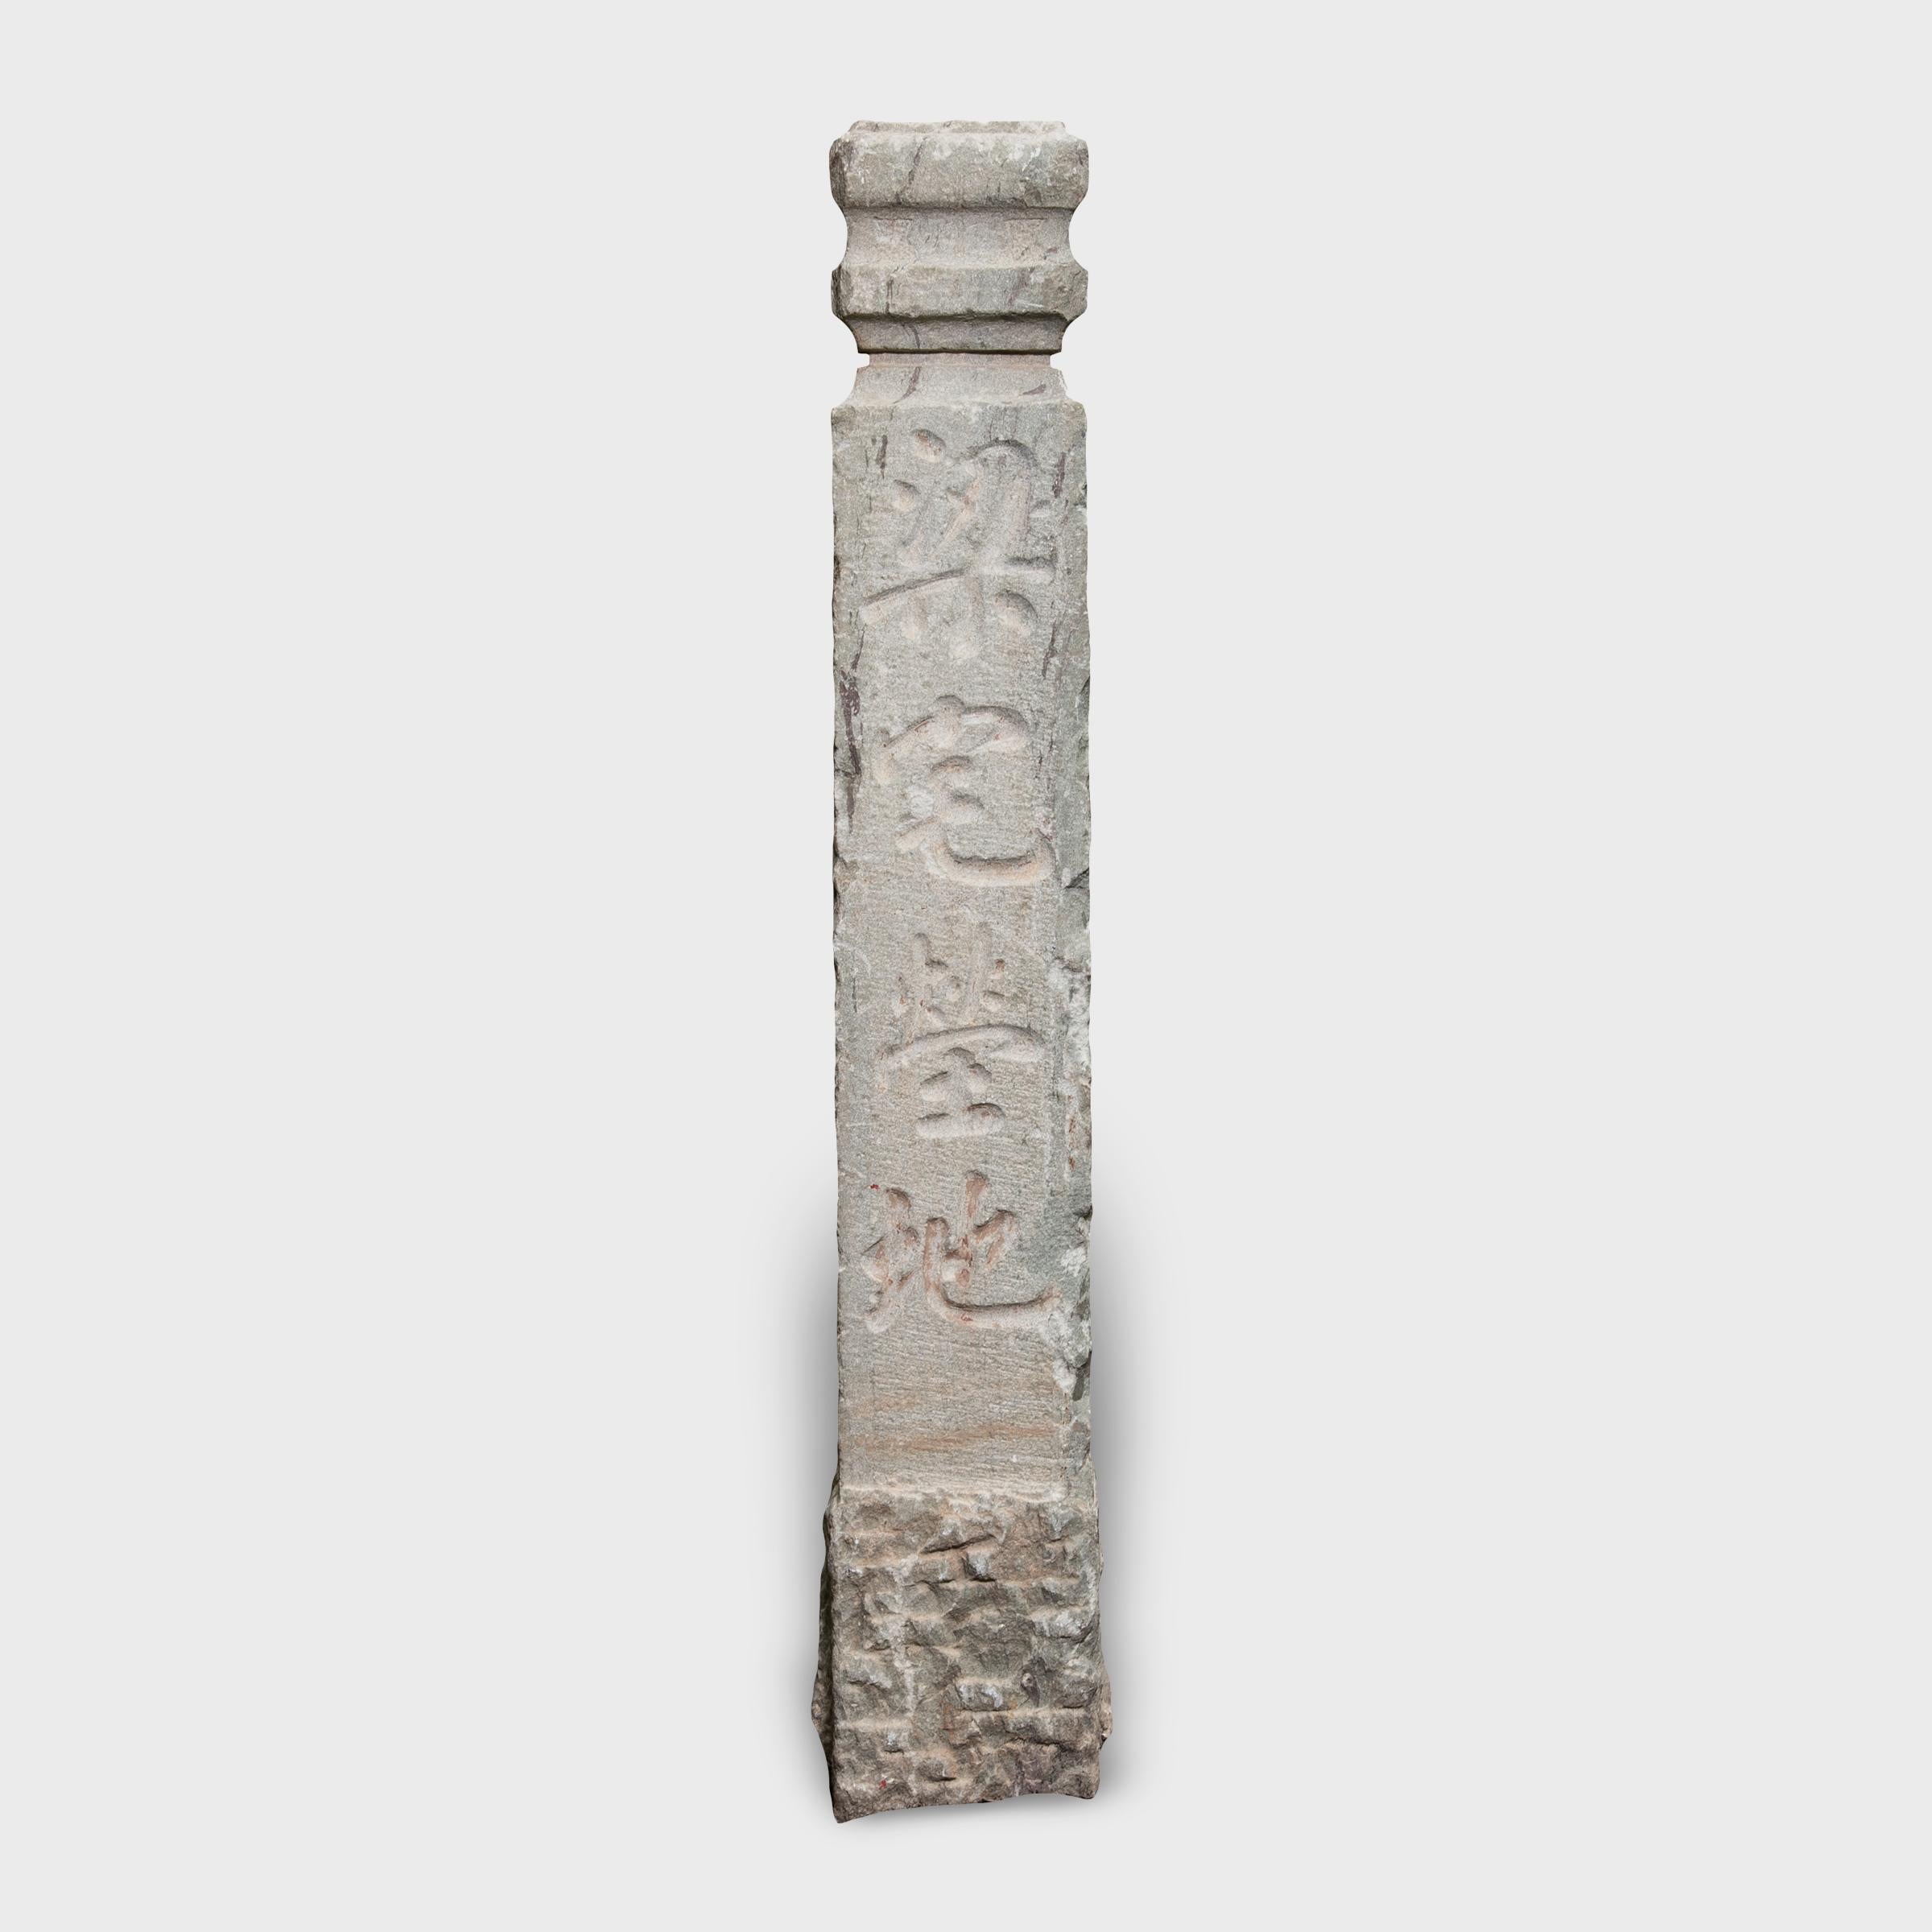 Happening upon an intersection, a traveler in Qing-dynasty China would have been grateful for the guidance of this limestone path marker. Still bearing traces of its original pigmentation, each side of this marker is inscribed with directions. One